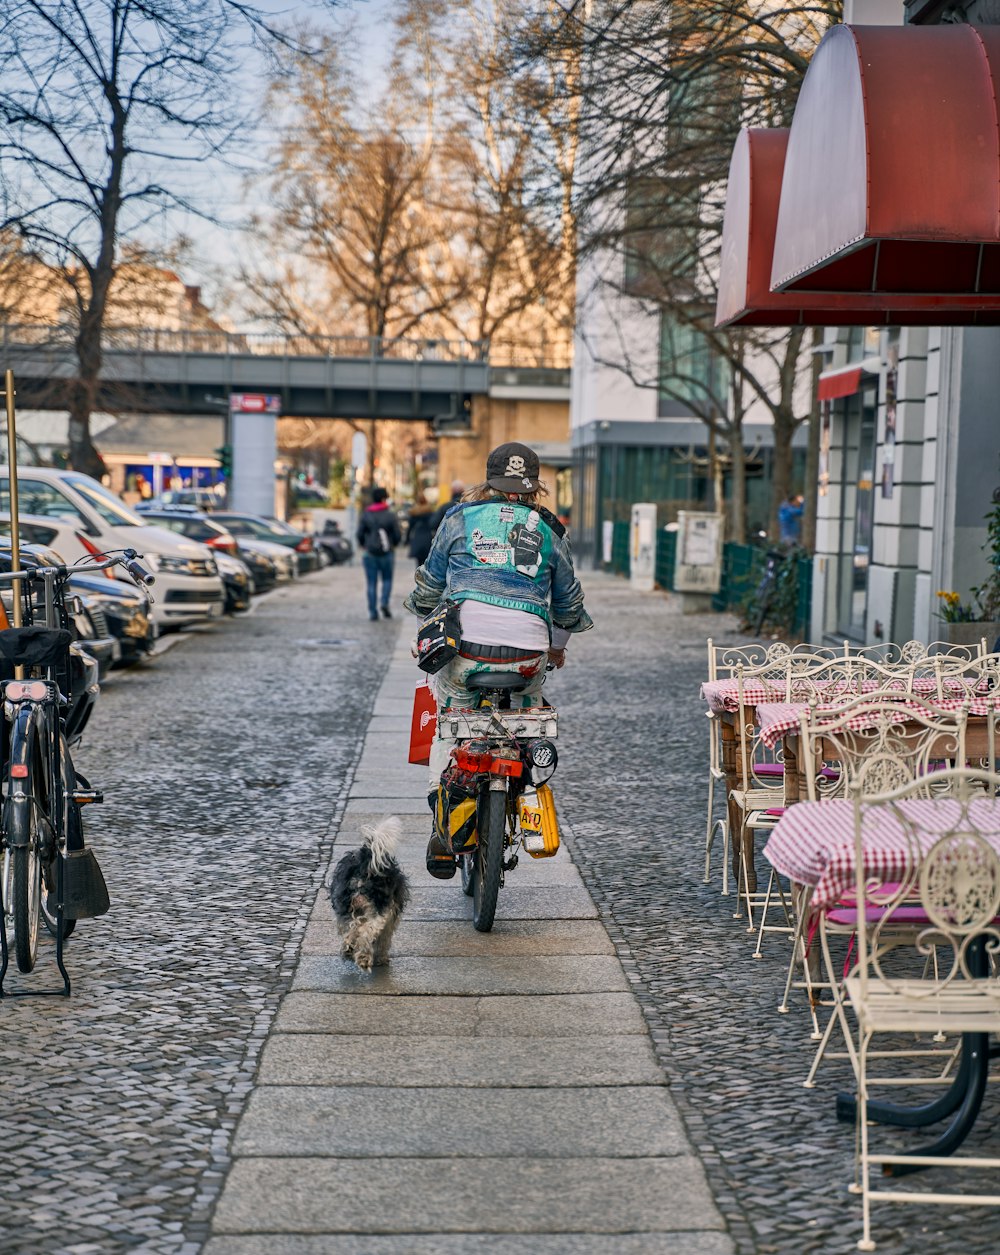 a person riding a bicycle with a dog on a leash